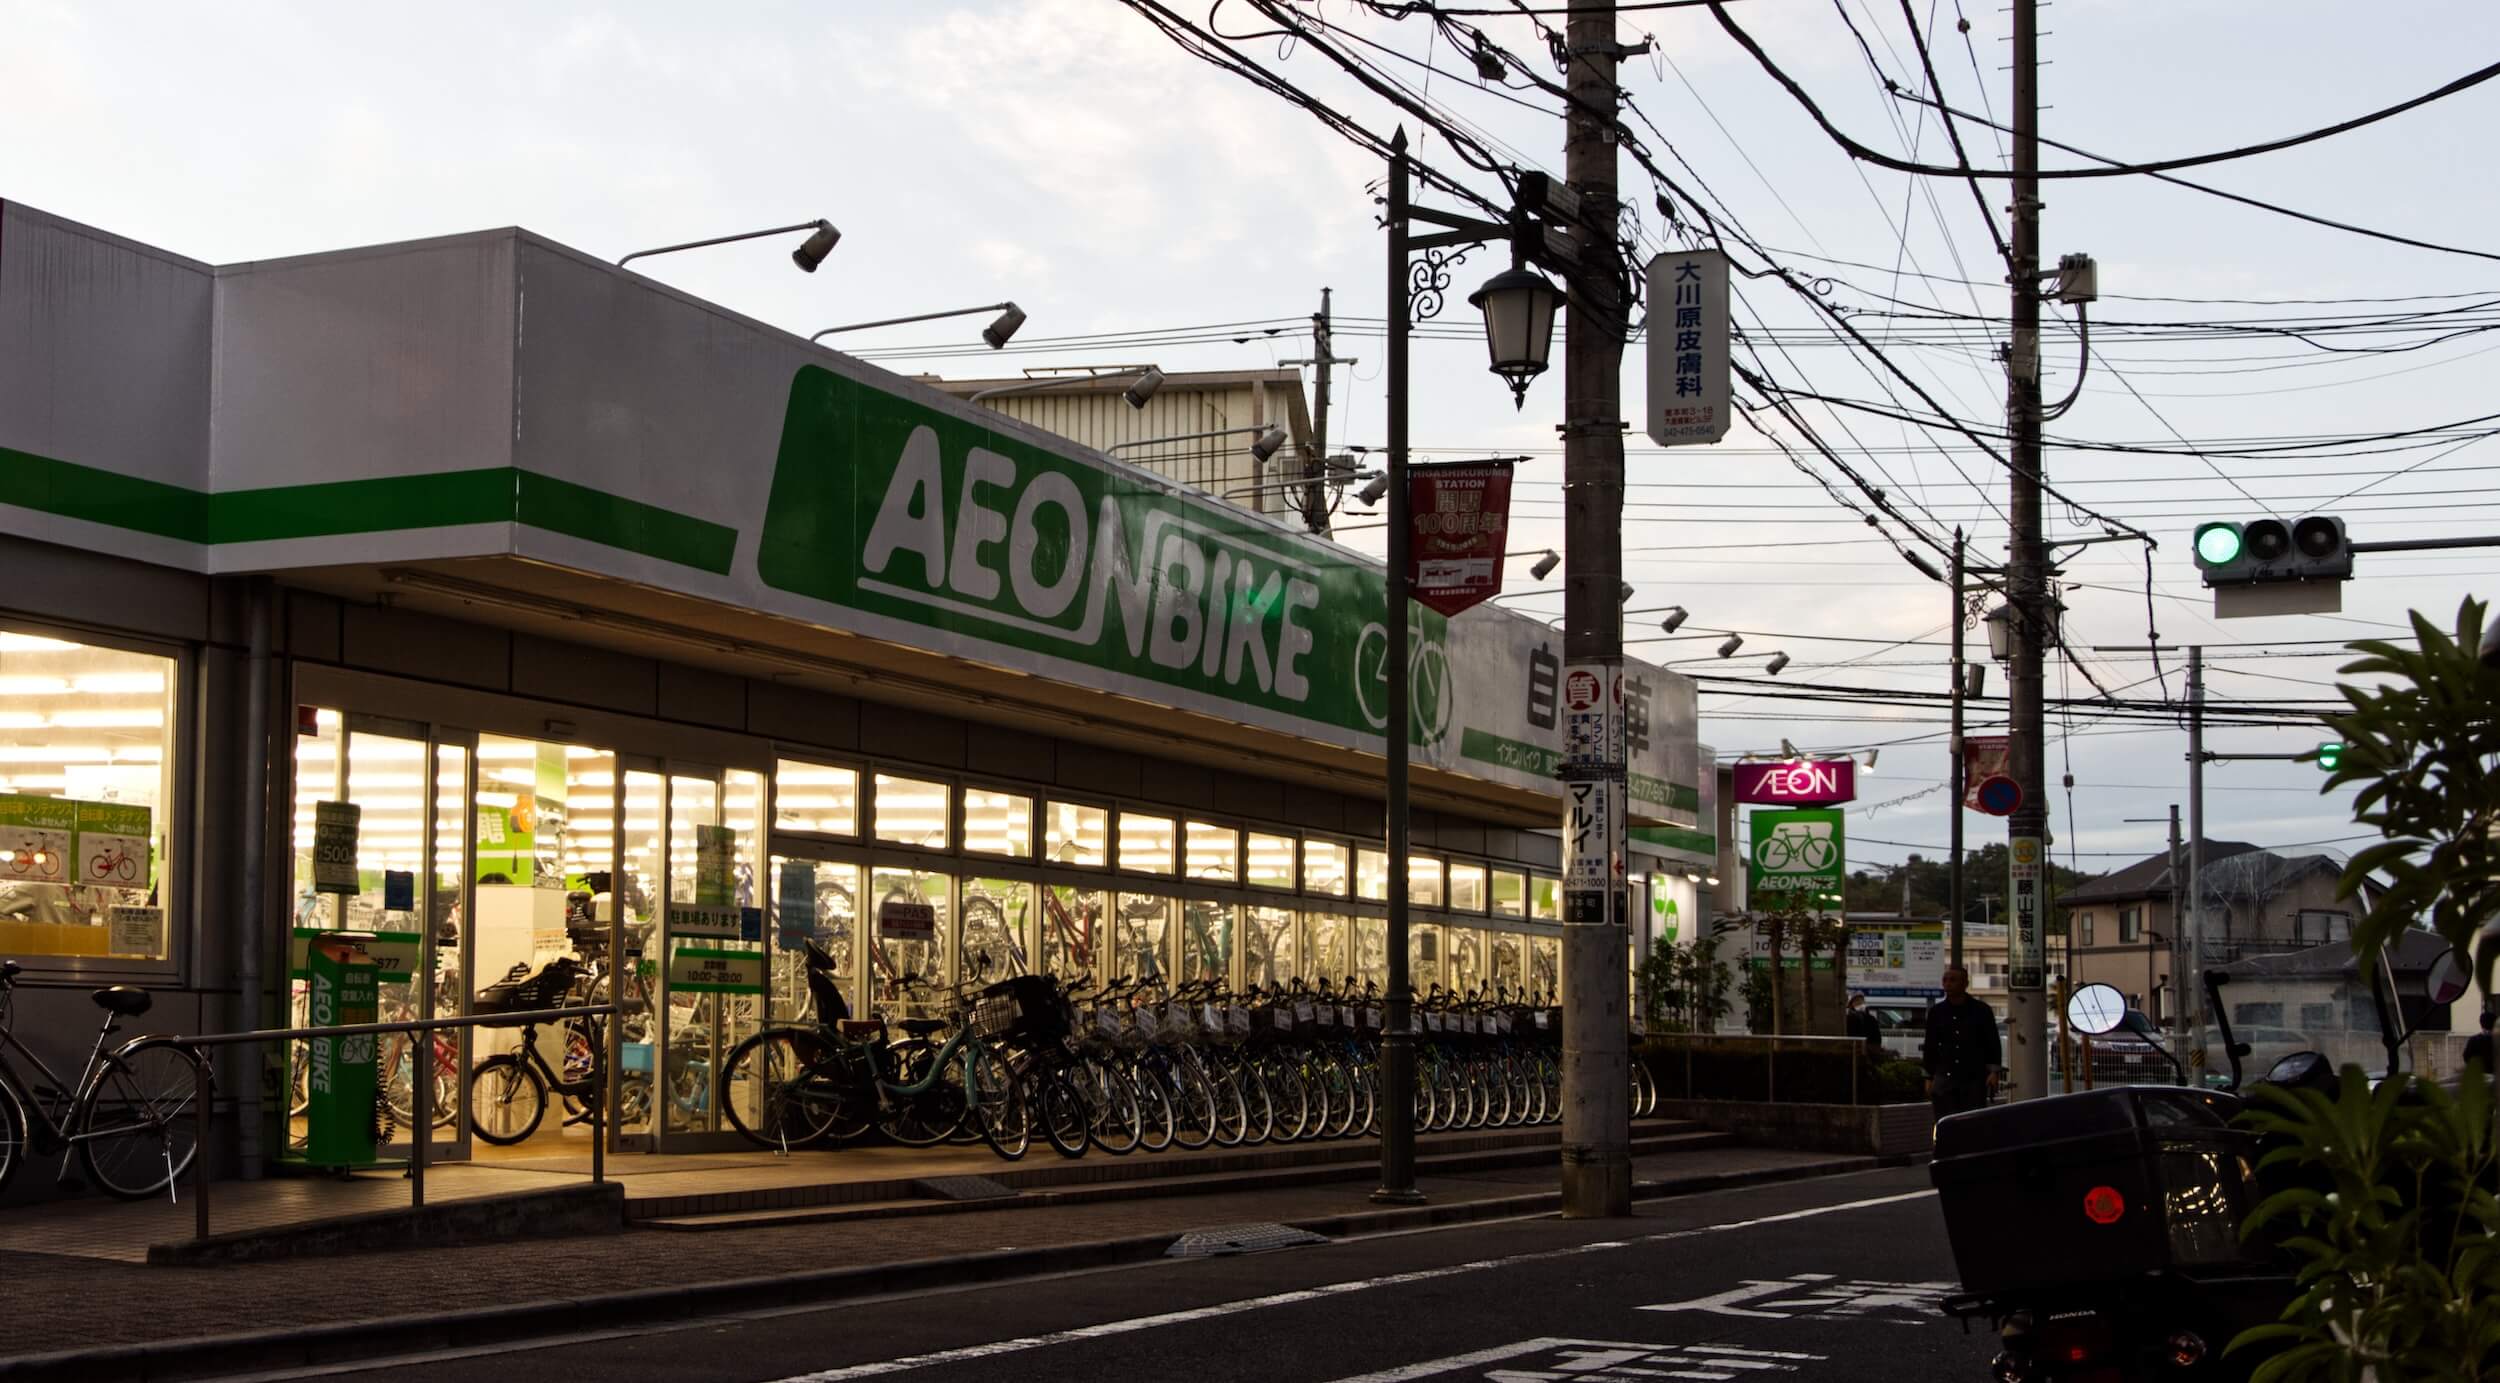 A bike shop at dusk. The interior is brightly lit and the light illuminates a row of bicycles outside